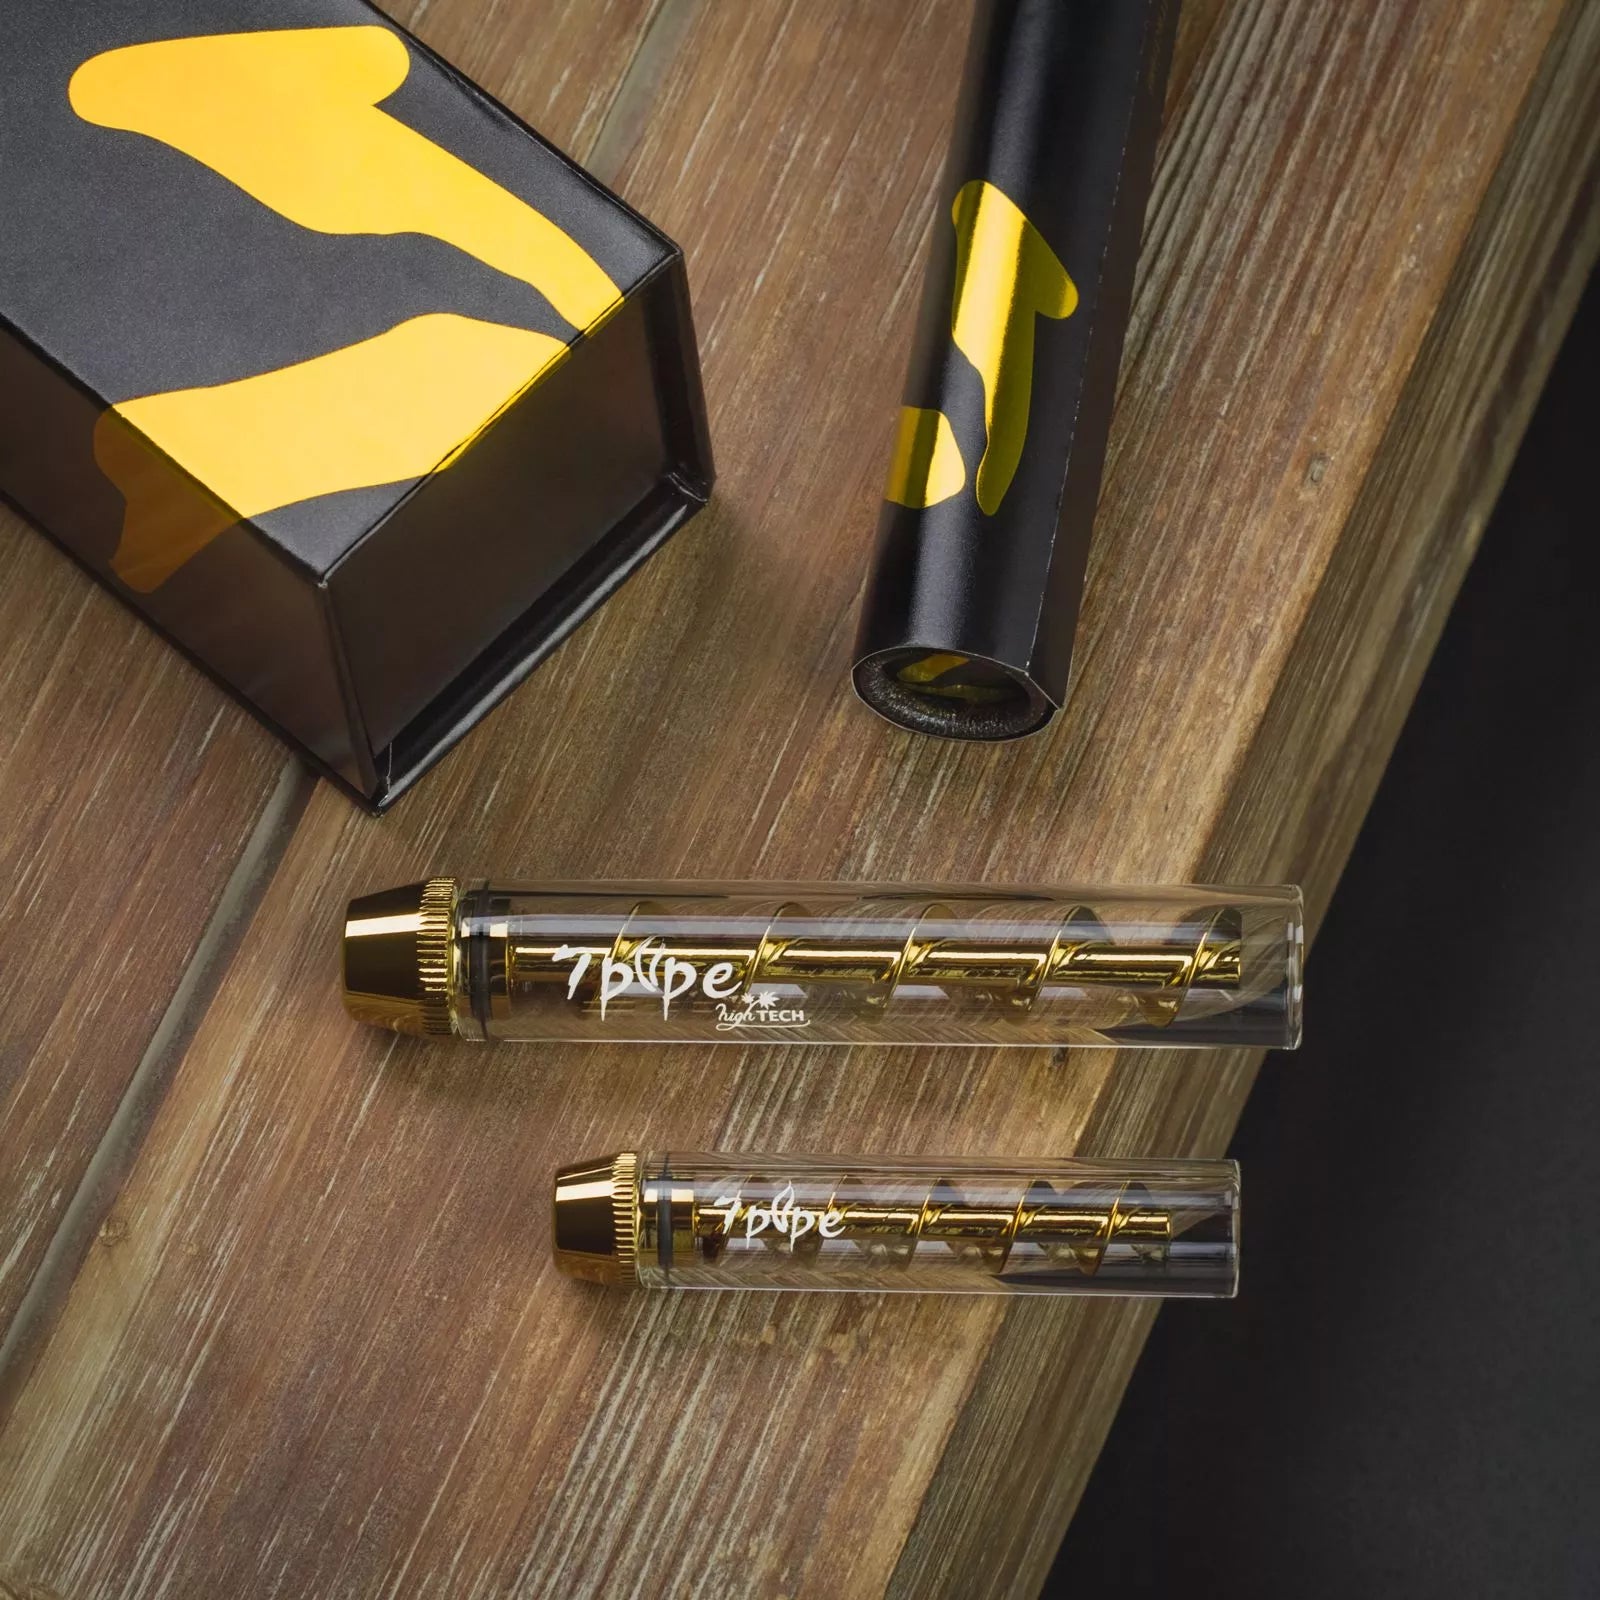 7Pipe Twisty Glass Blunt Review – Twisted Ways